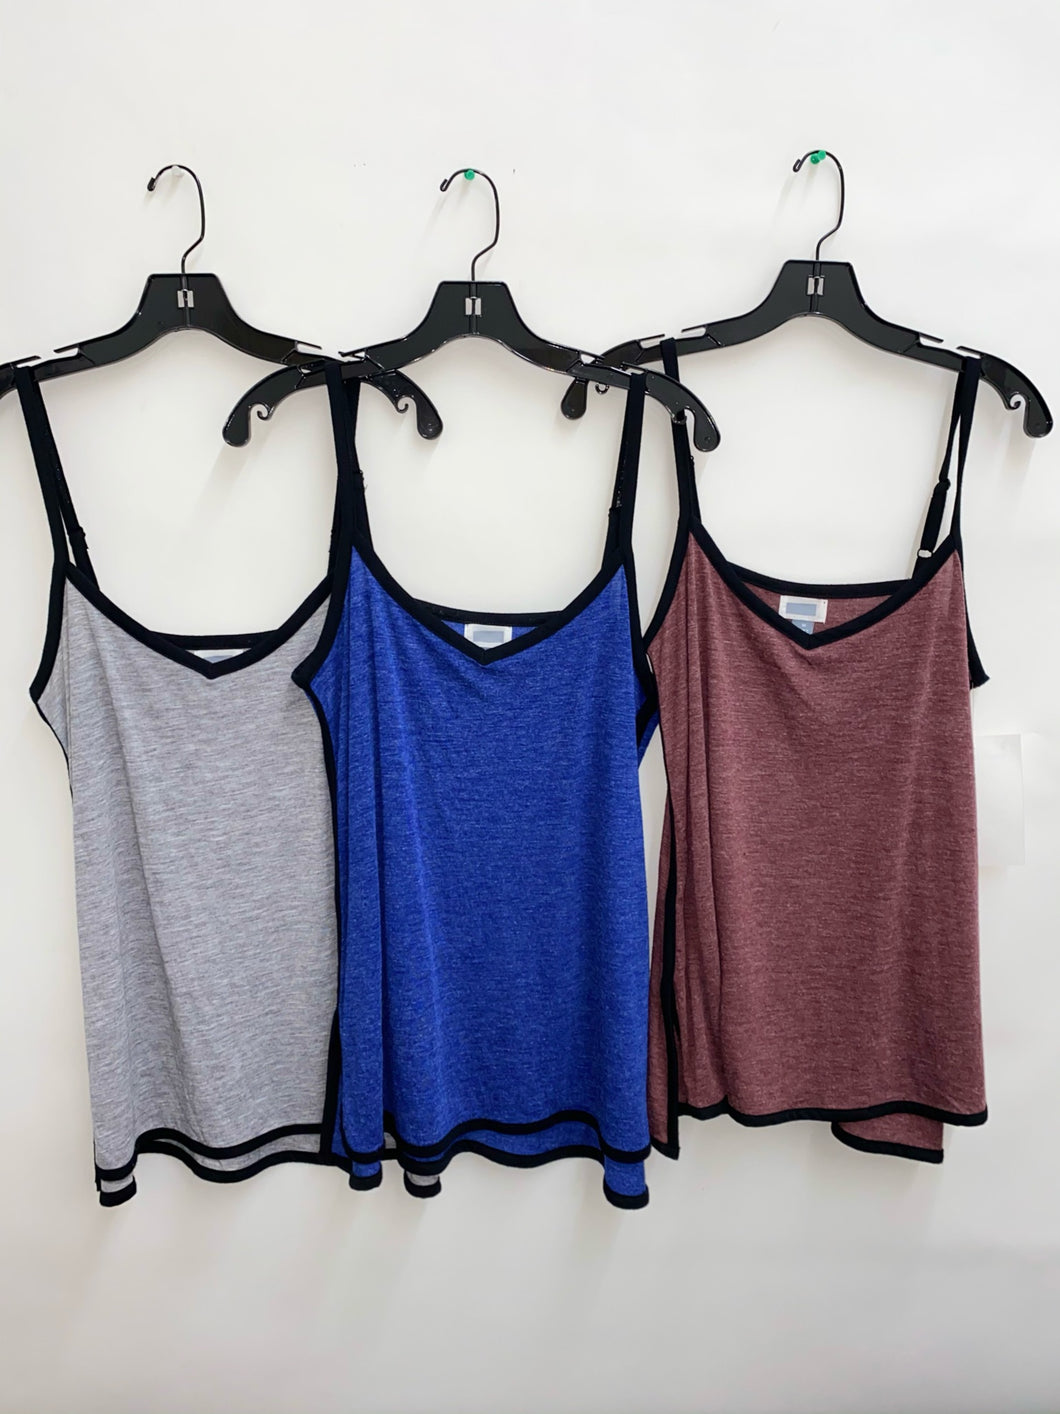 Daily Tank Tops (24 pack)